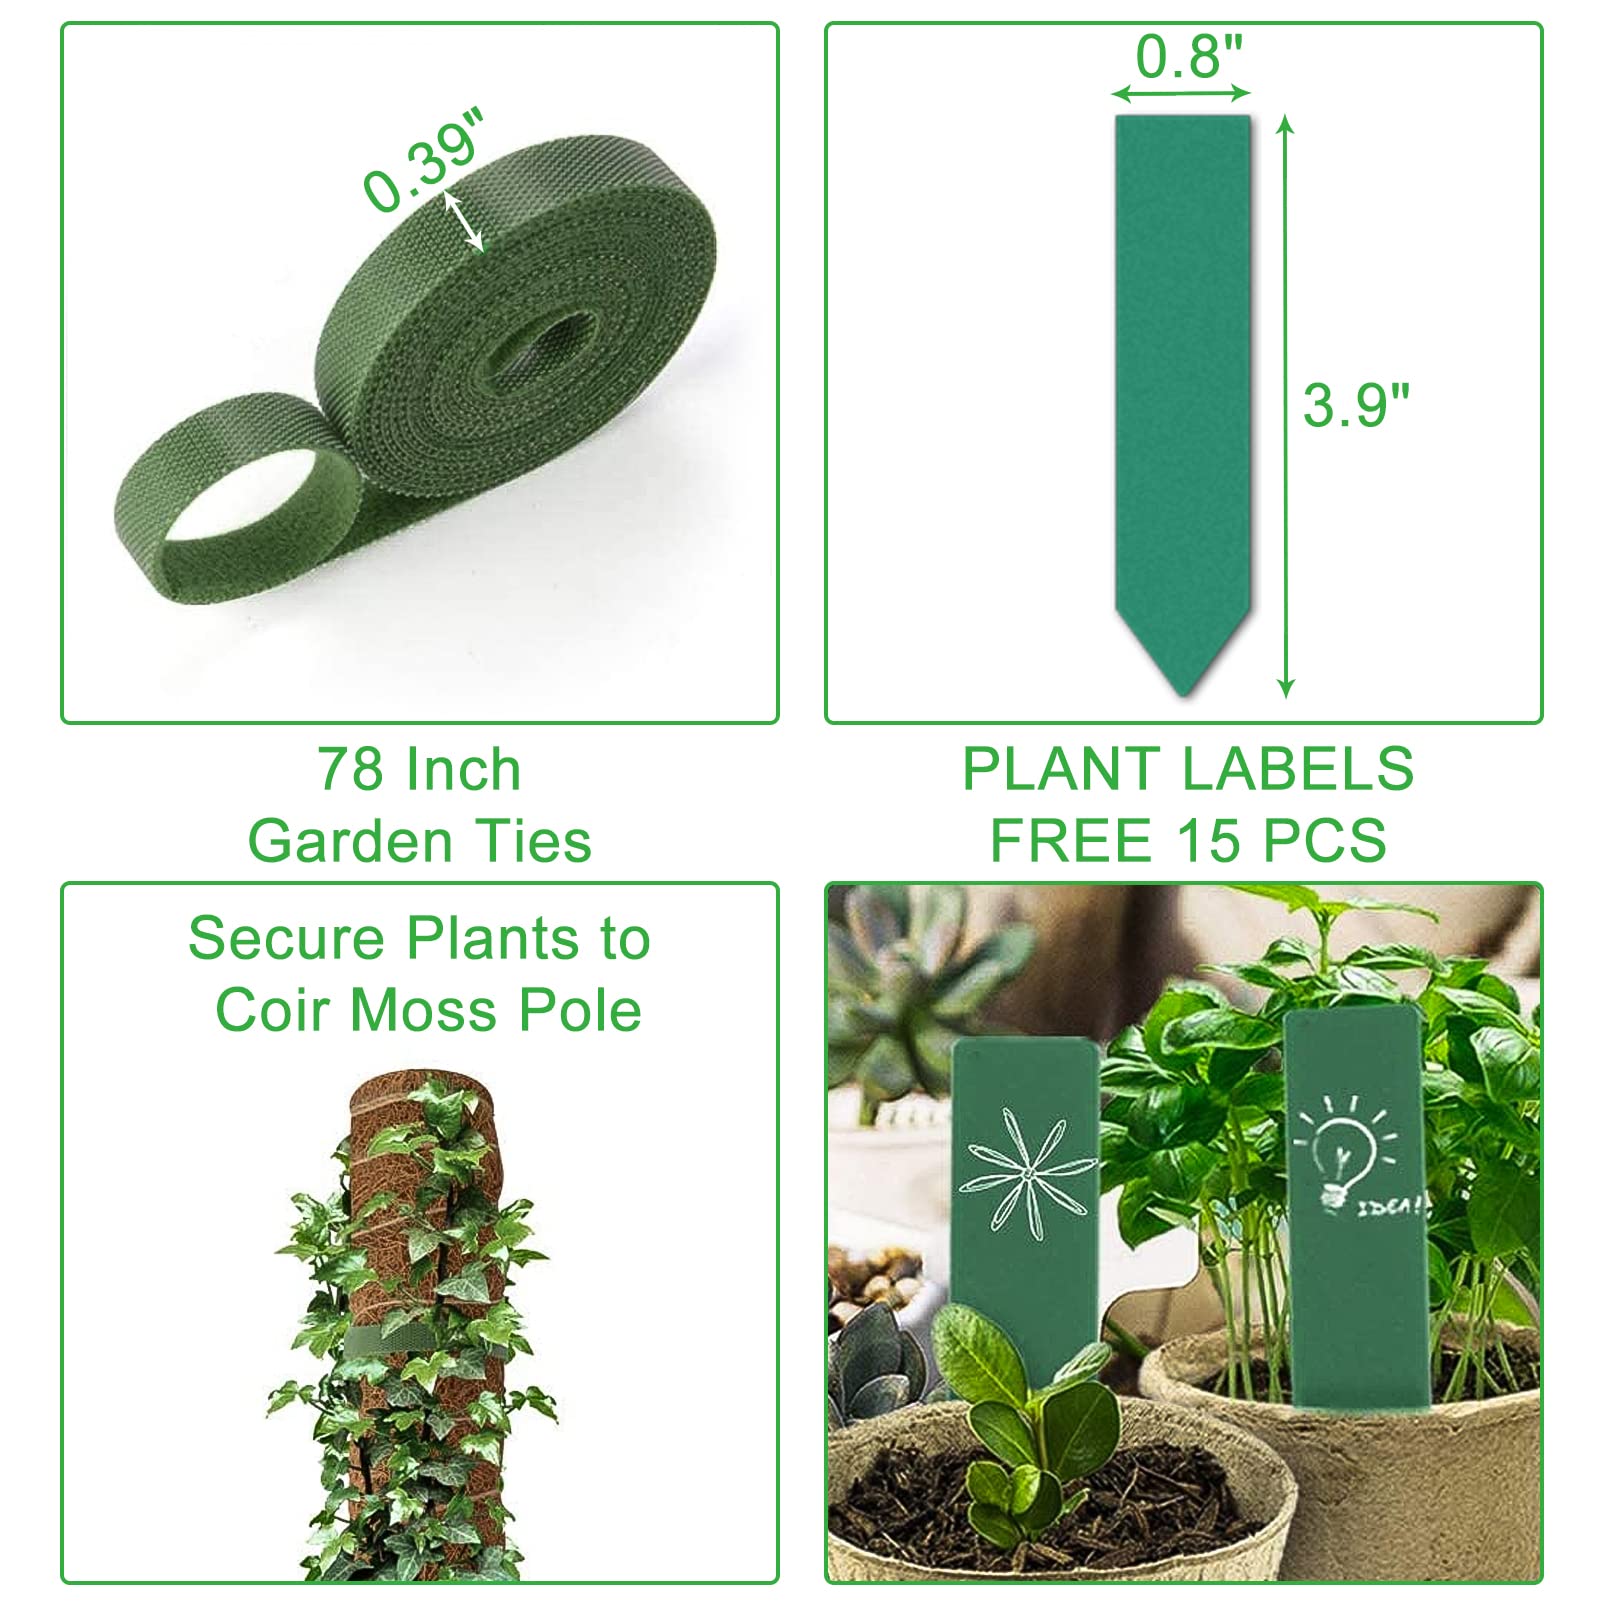 GROWNEER 24 Inch Moss Pole, 2 Pcs 15 Inch Stackable Totem Pole Plant Support, Moss Sticks for Indoor Plants with 15pcs Labels and 78in Garden Ties, Monstera Plant Stake for Climbing Plants Snake Plant